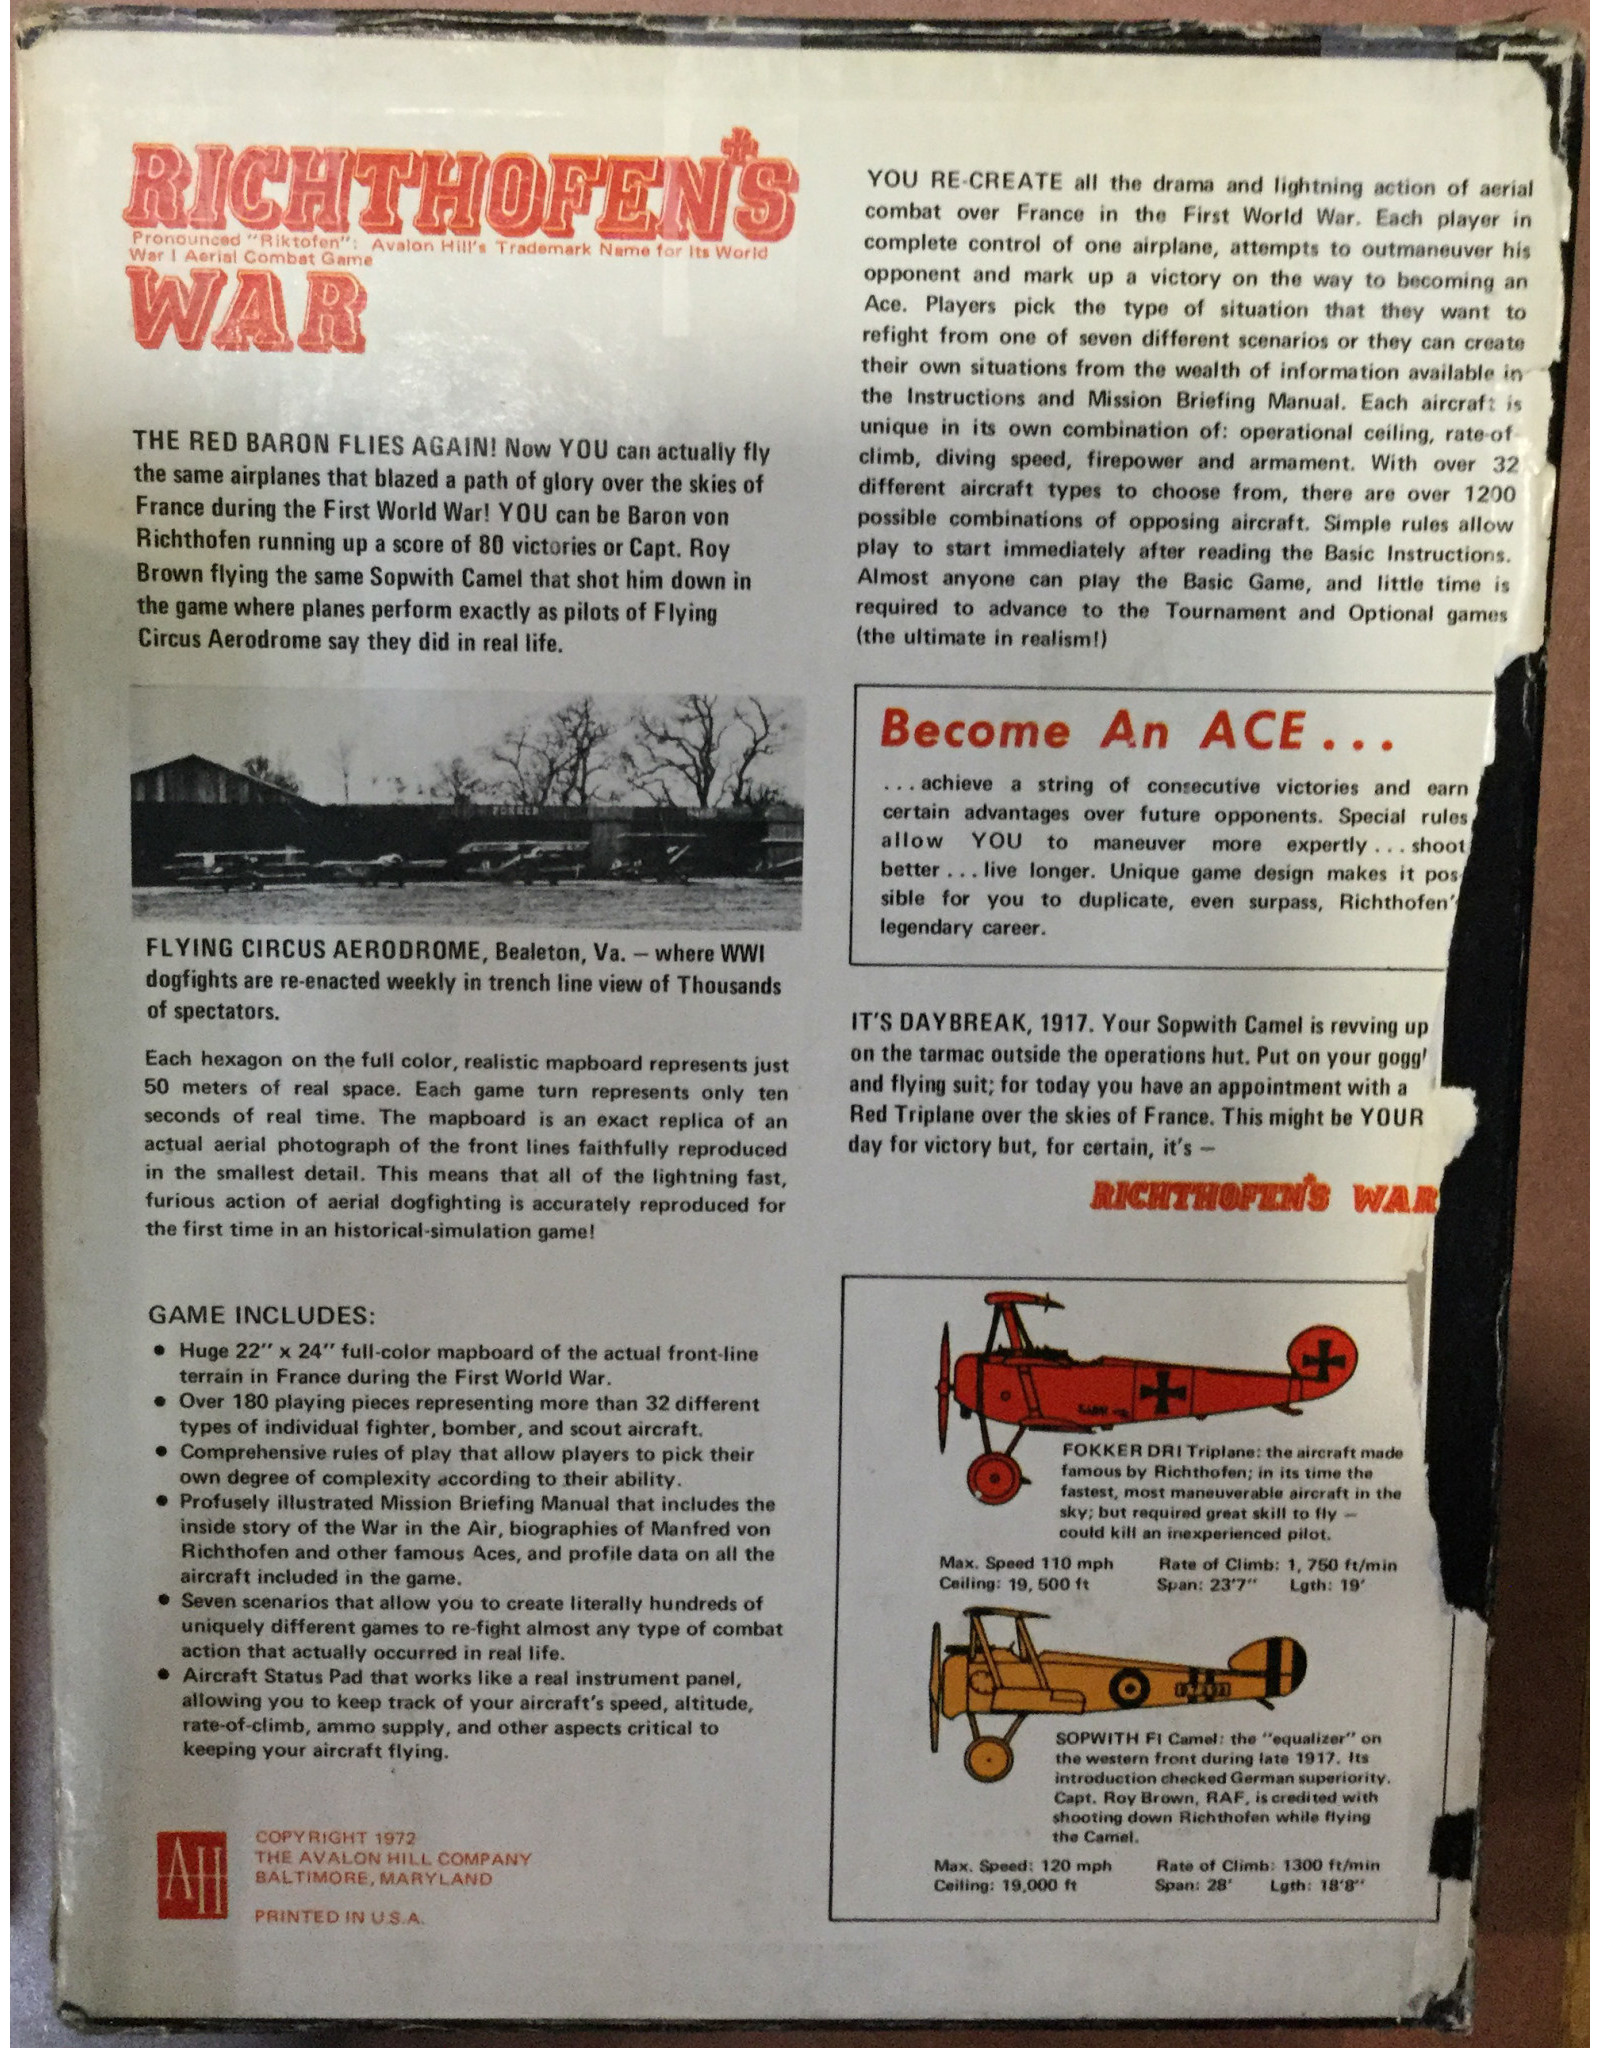 Avalon Hill Game Company Righthofen's War (1972)